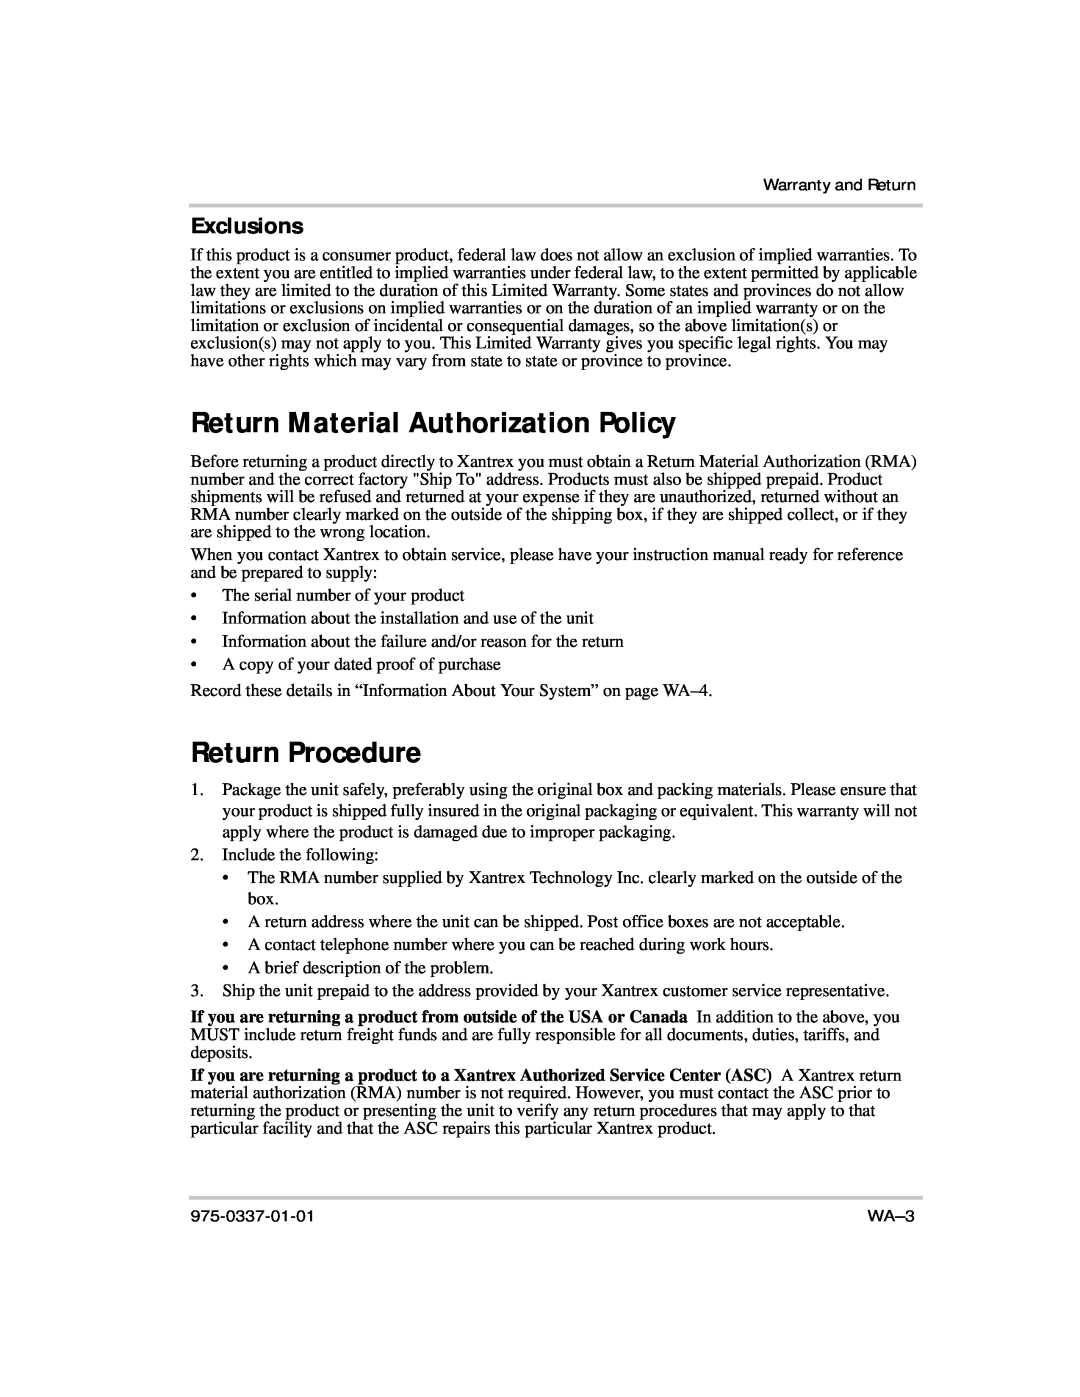 Xantrex Technology IP1012 AL manual Return Material Authorization Policy, Return Procedure, Exclusions 